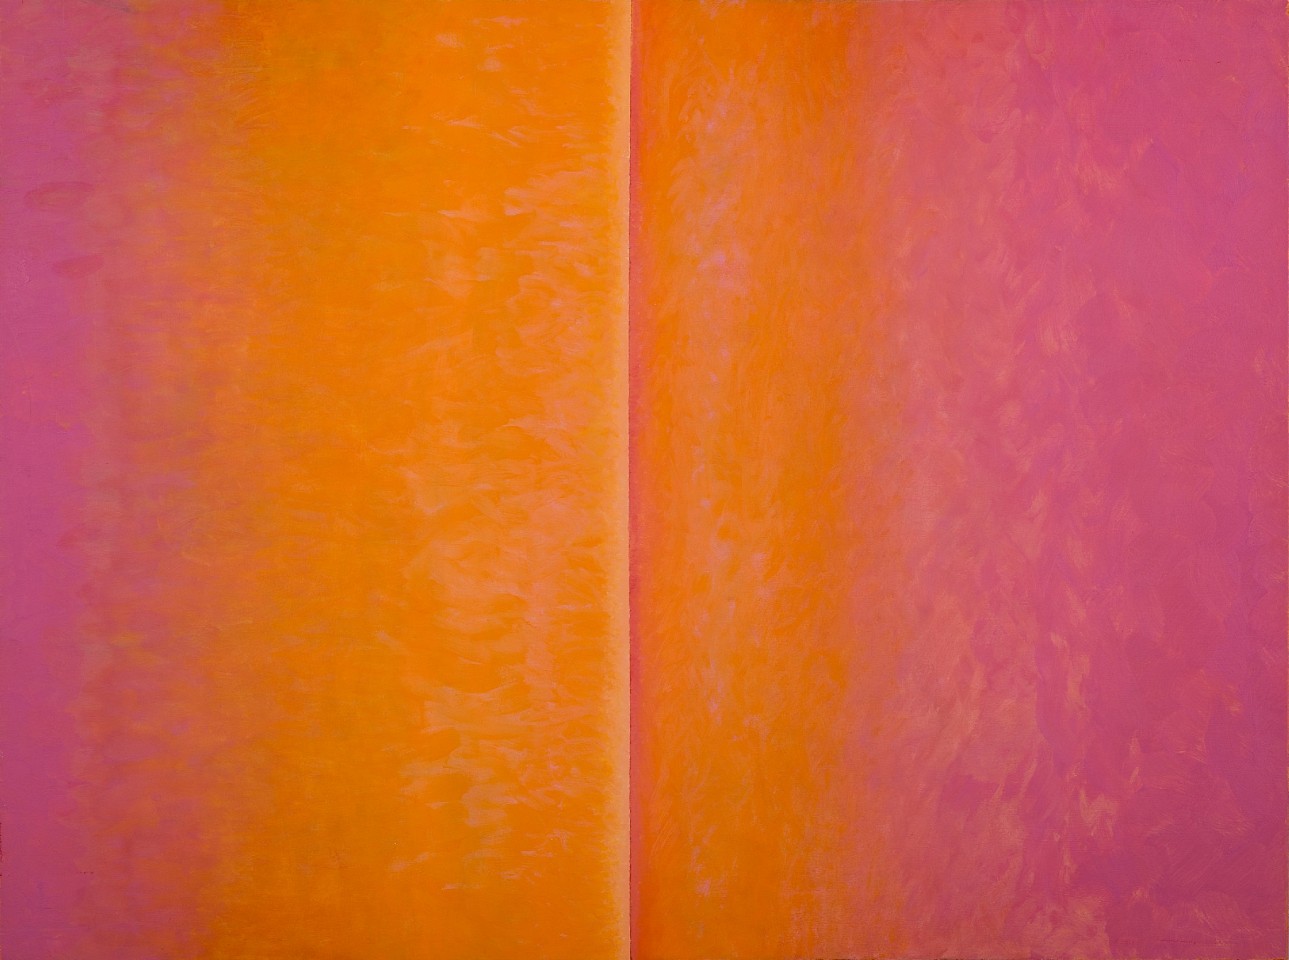 Janet Rogers, Golden Morning, 1990
Encaustic on Canvas, 48 x 64 in.
ROGE00092